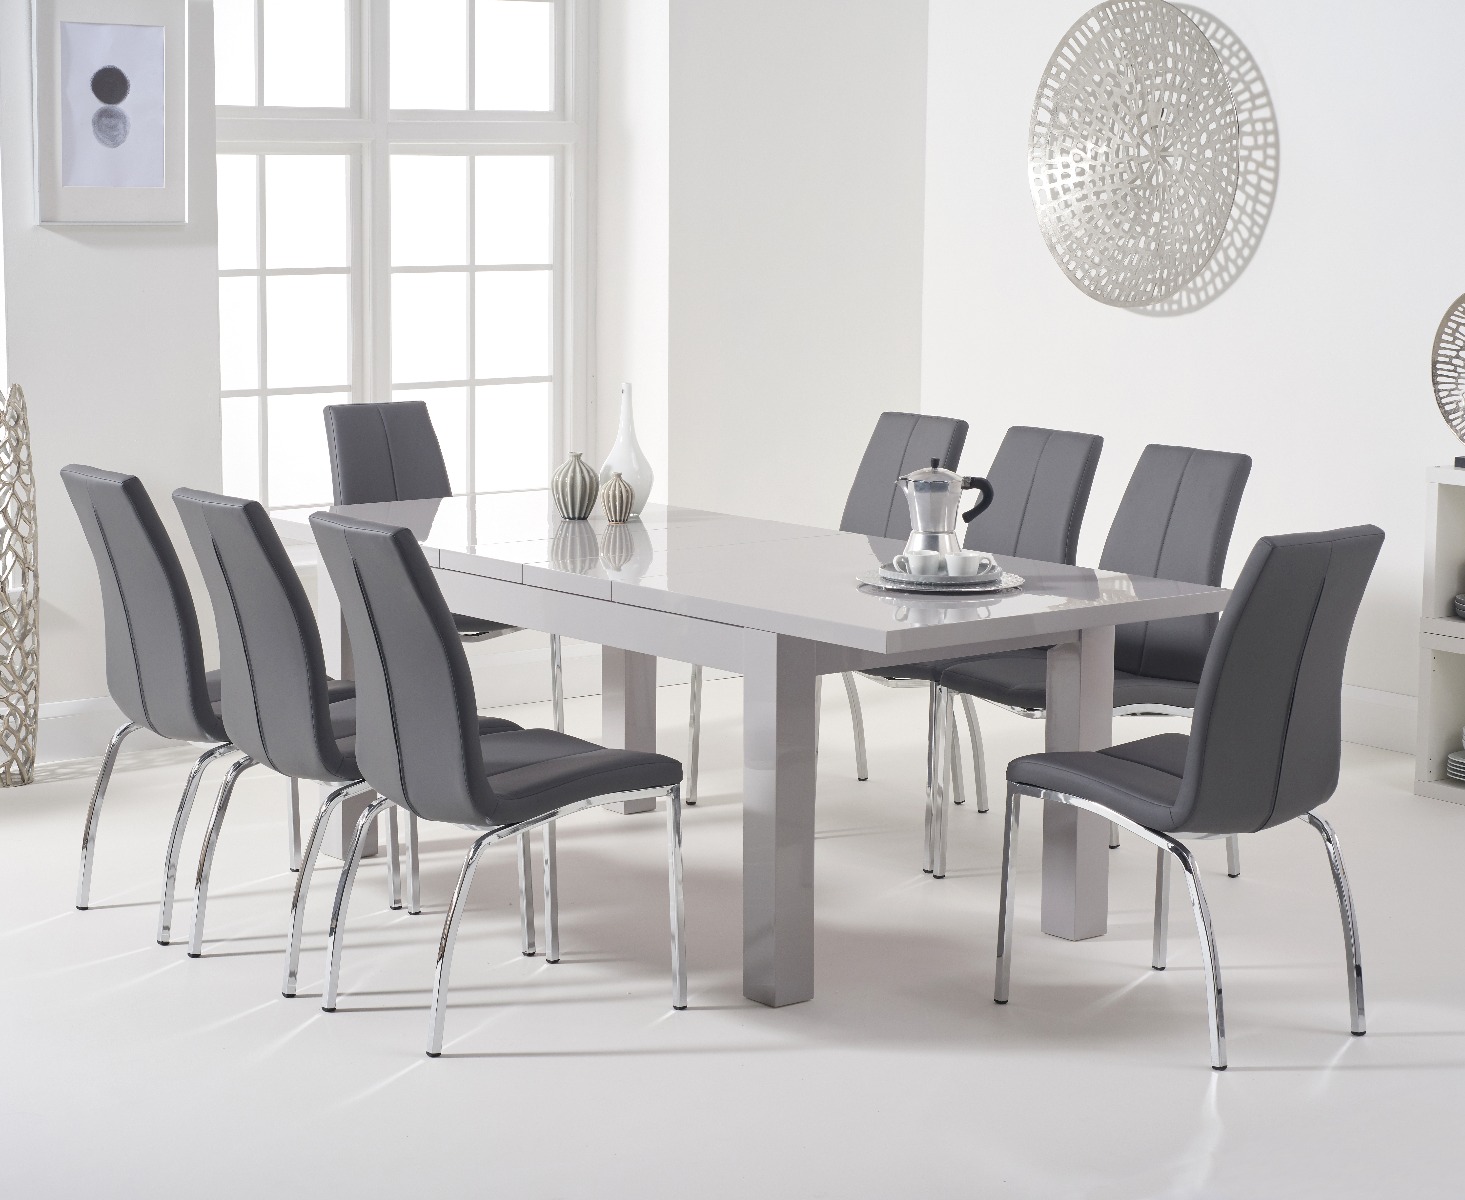 Atlanta Light Grey Gloss 160220cm Extending Dining Table With 10 Ivory White Cavello Chairs